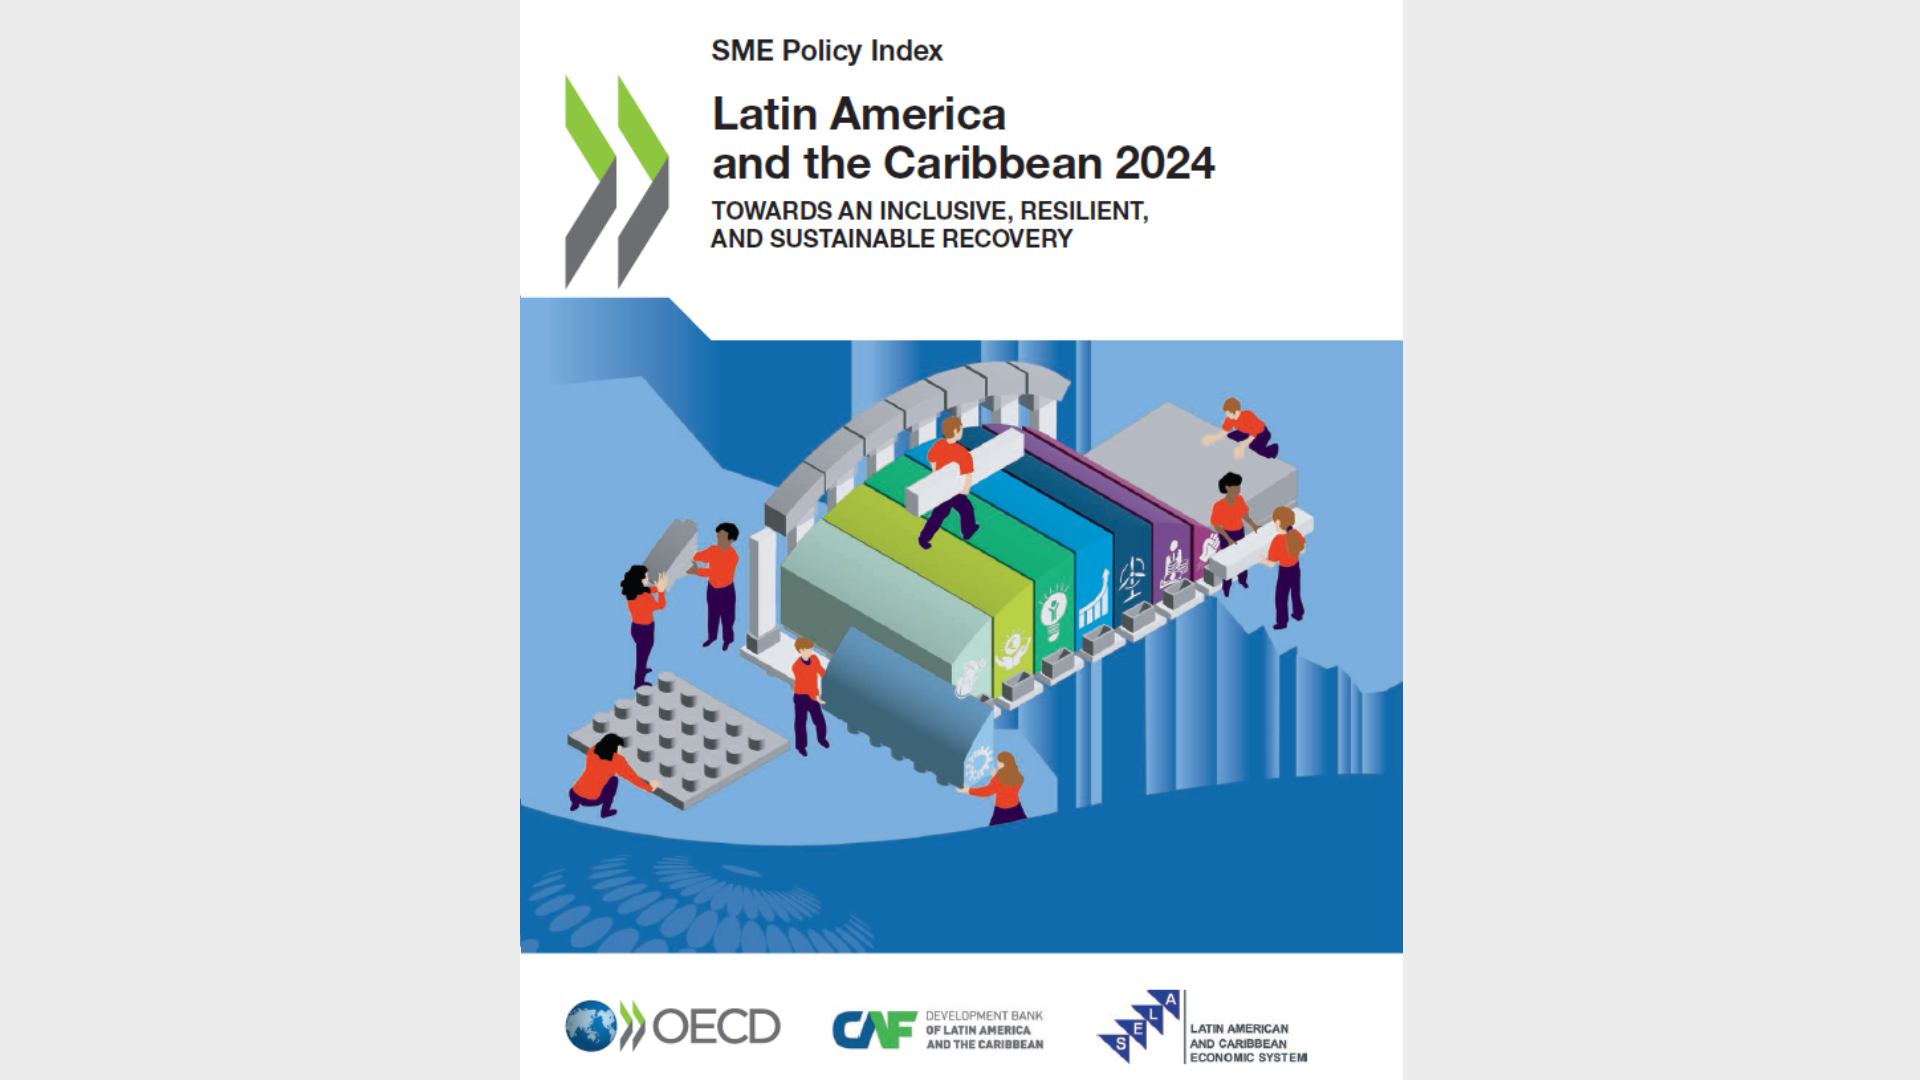 SME Policy Index Latin America and the Caribbean 2024: Towards an inclusive, resilient, and sustainable recovery